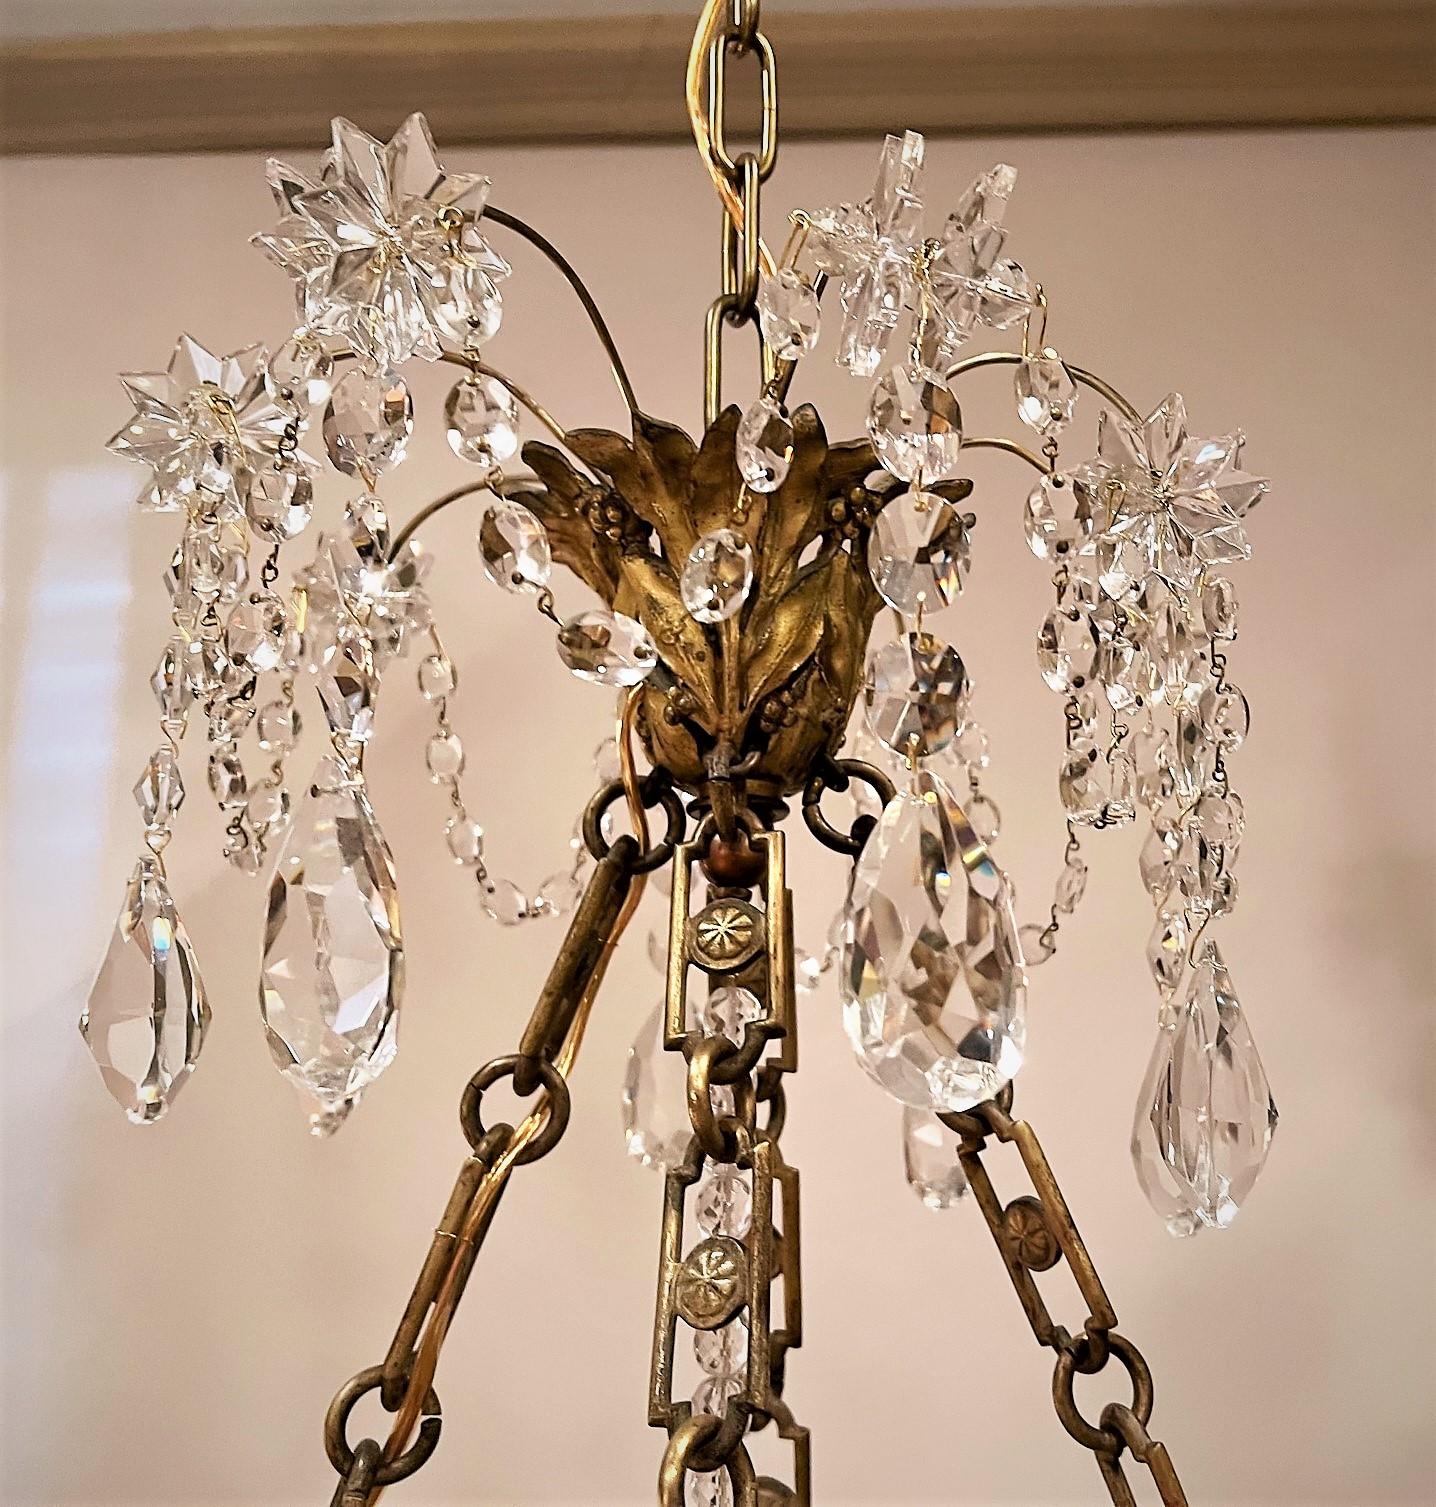 Mid-19th Century Neo-Classic 8-Light Gilt Bronze & Crystal Chandelier, France, Circa:1830 For Sale